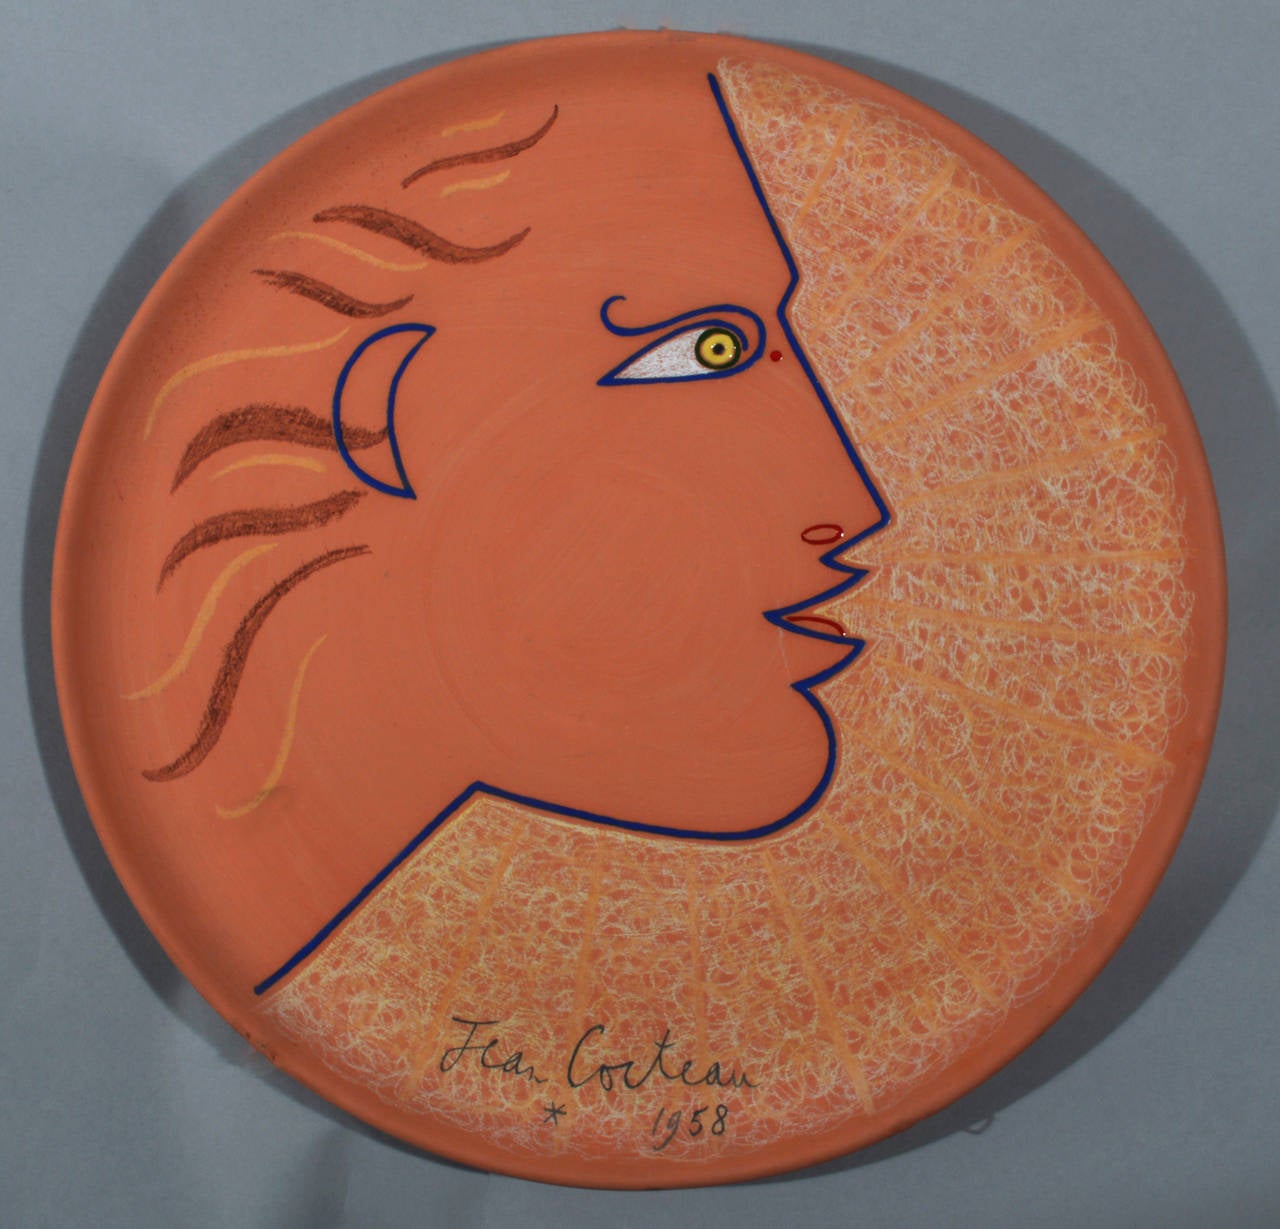 Phebus- Apollon. 
Signed and dated by Jean Cocteau, 1958. 
Number 11 of an edition of 30.

Painted and partially glazed terracotta dish.

Marks: Signed and dated on front; 
On reverse inscribed Edition Originale de Jean Cocteau, Atelier